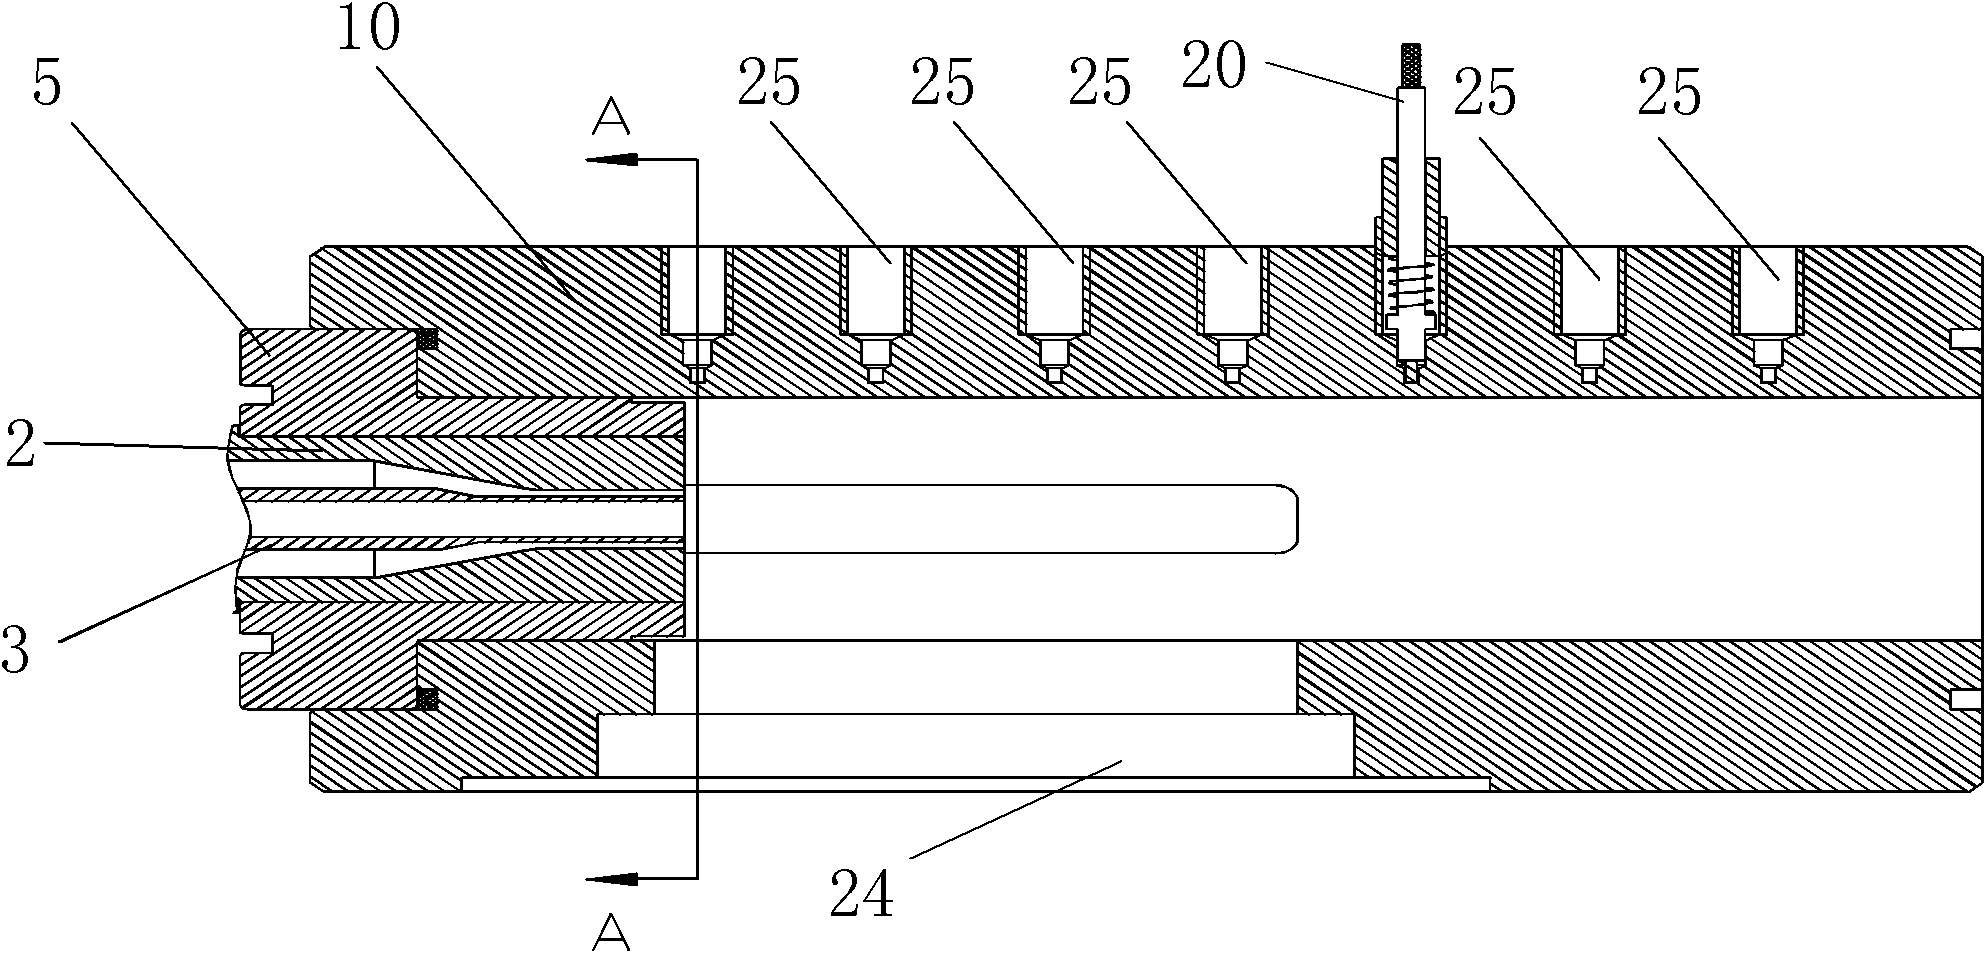 Transparent combustion chamber with square interior passage